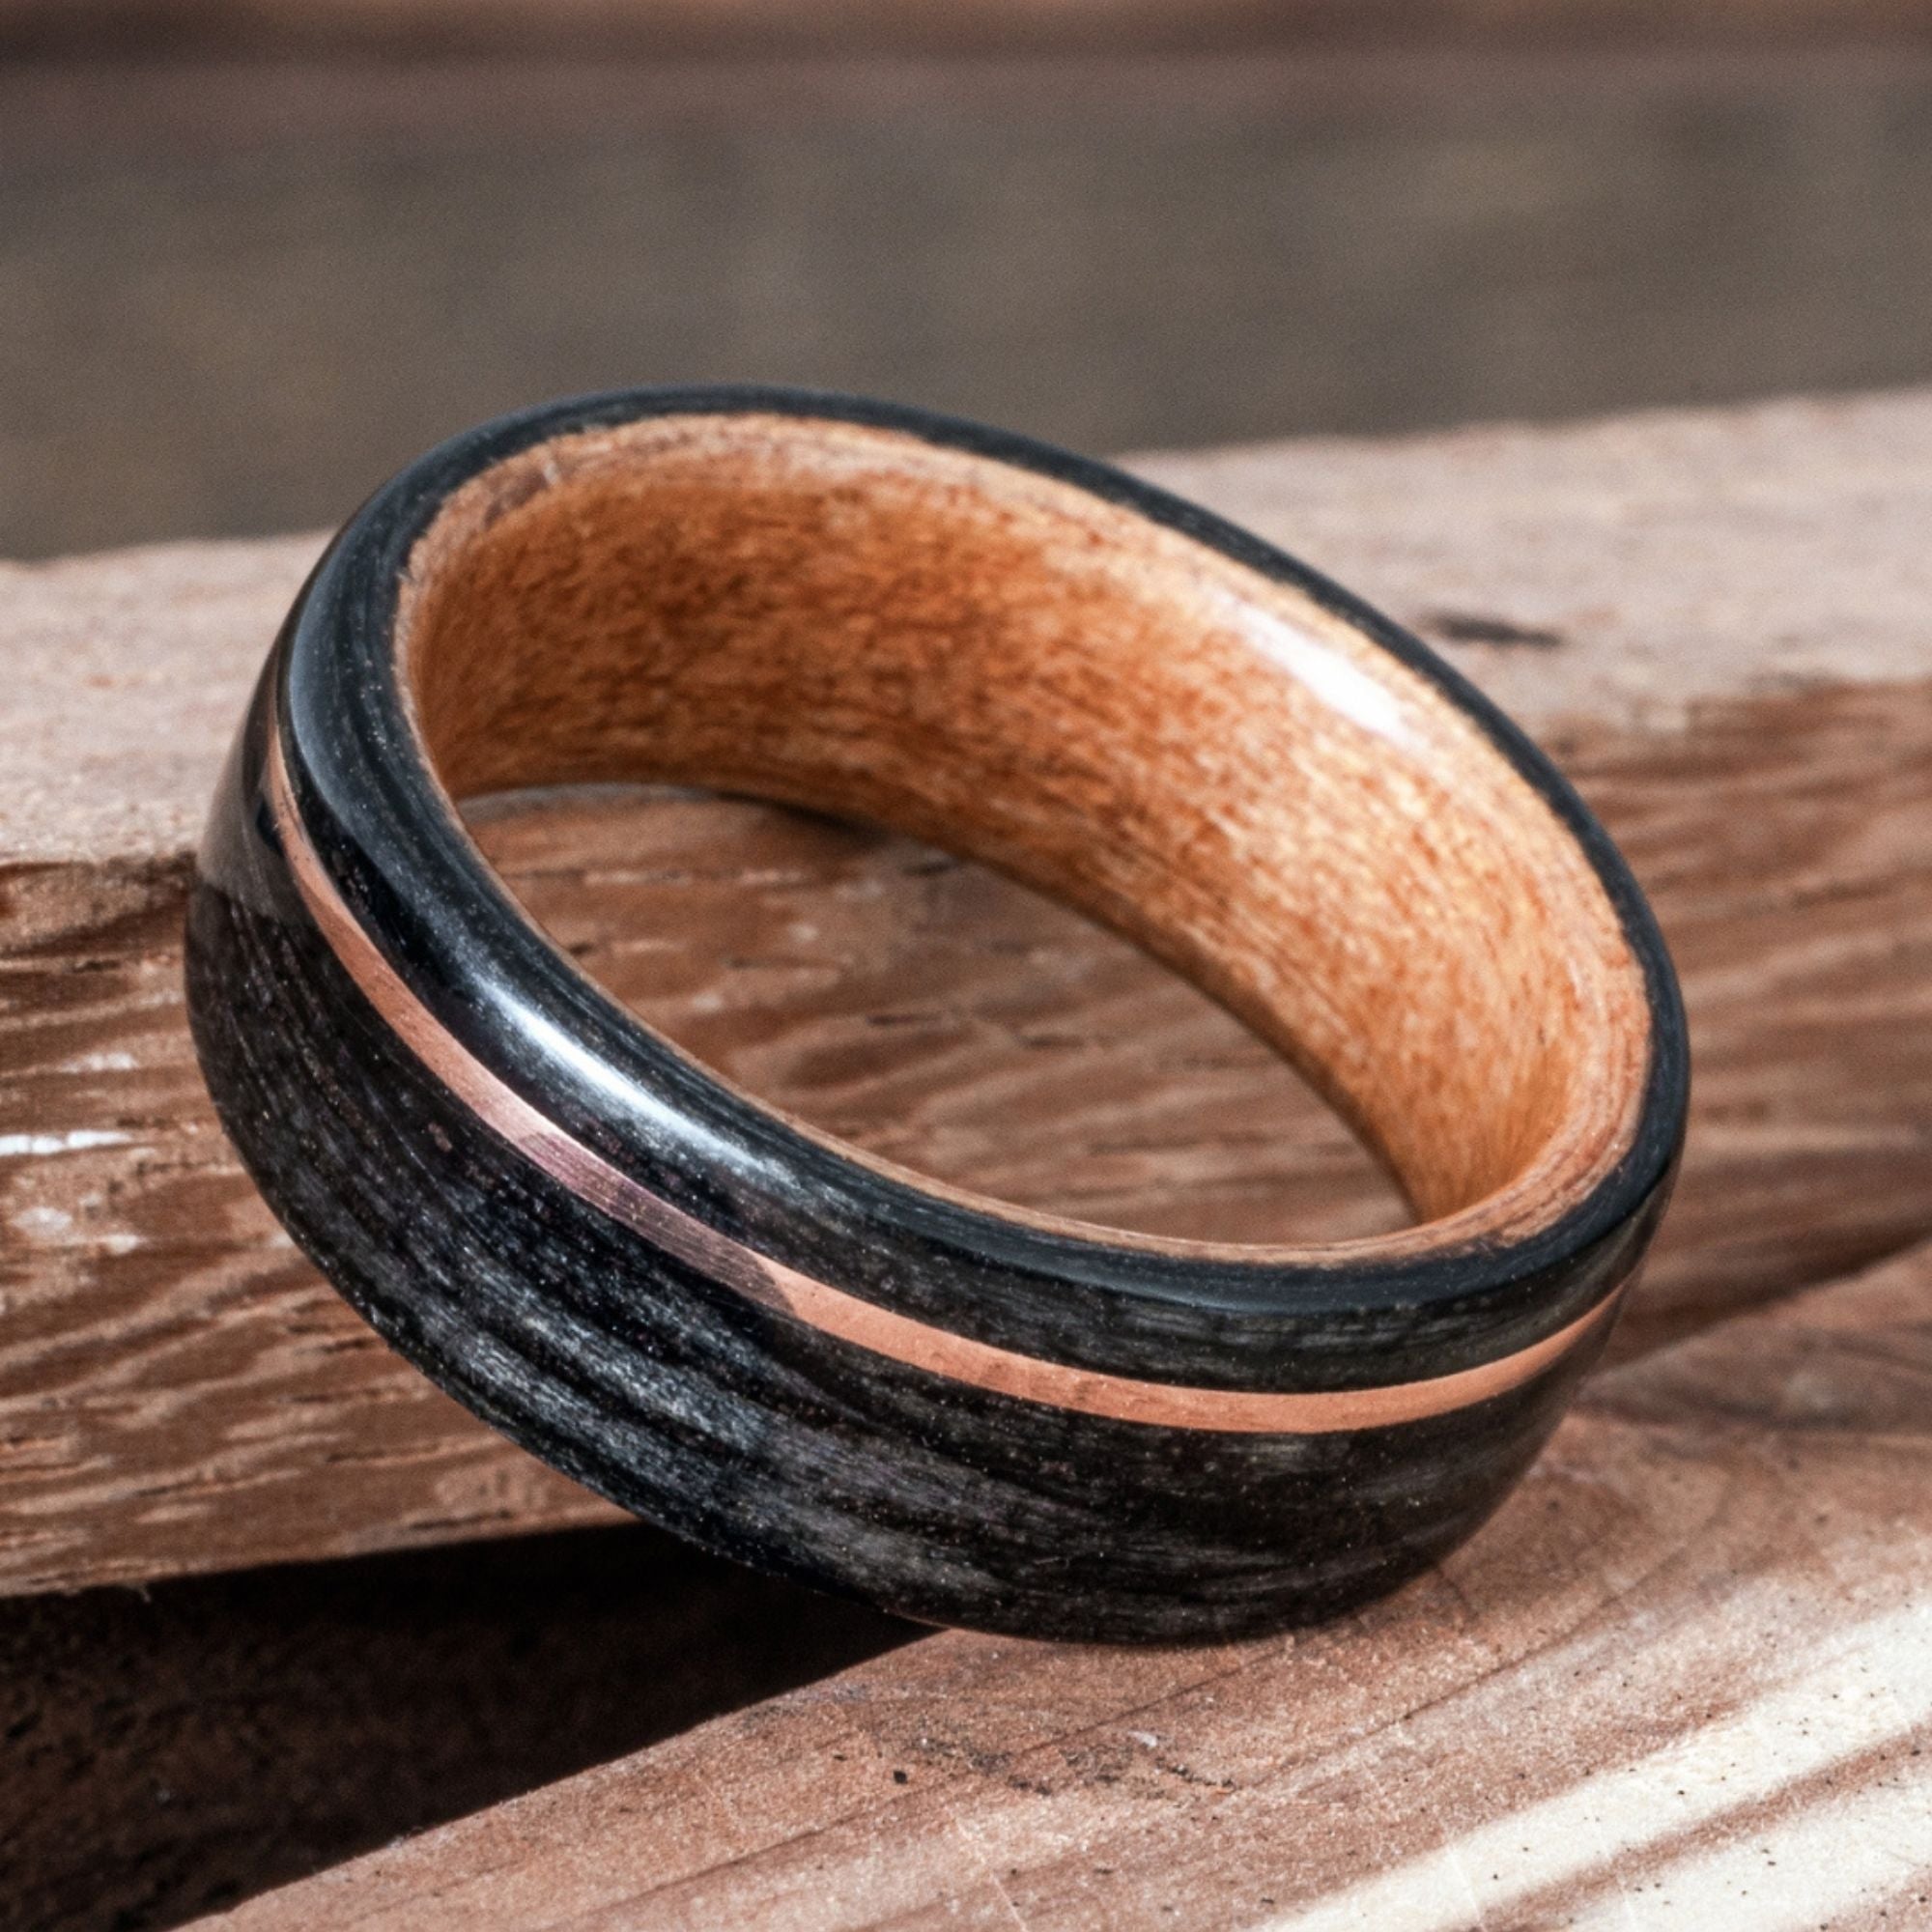 Men's Country The Lynchburg | Black Hammered Charred Whiskey Barrel Wedding Ring Size 14.5